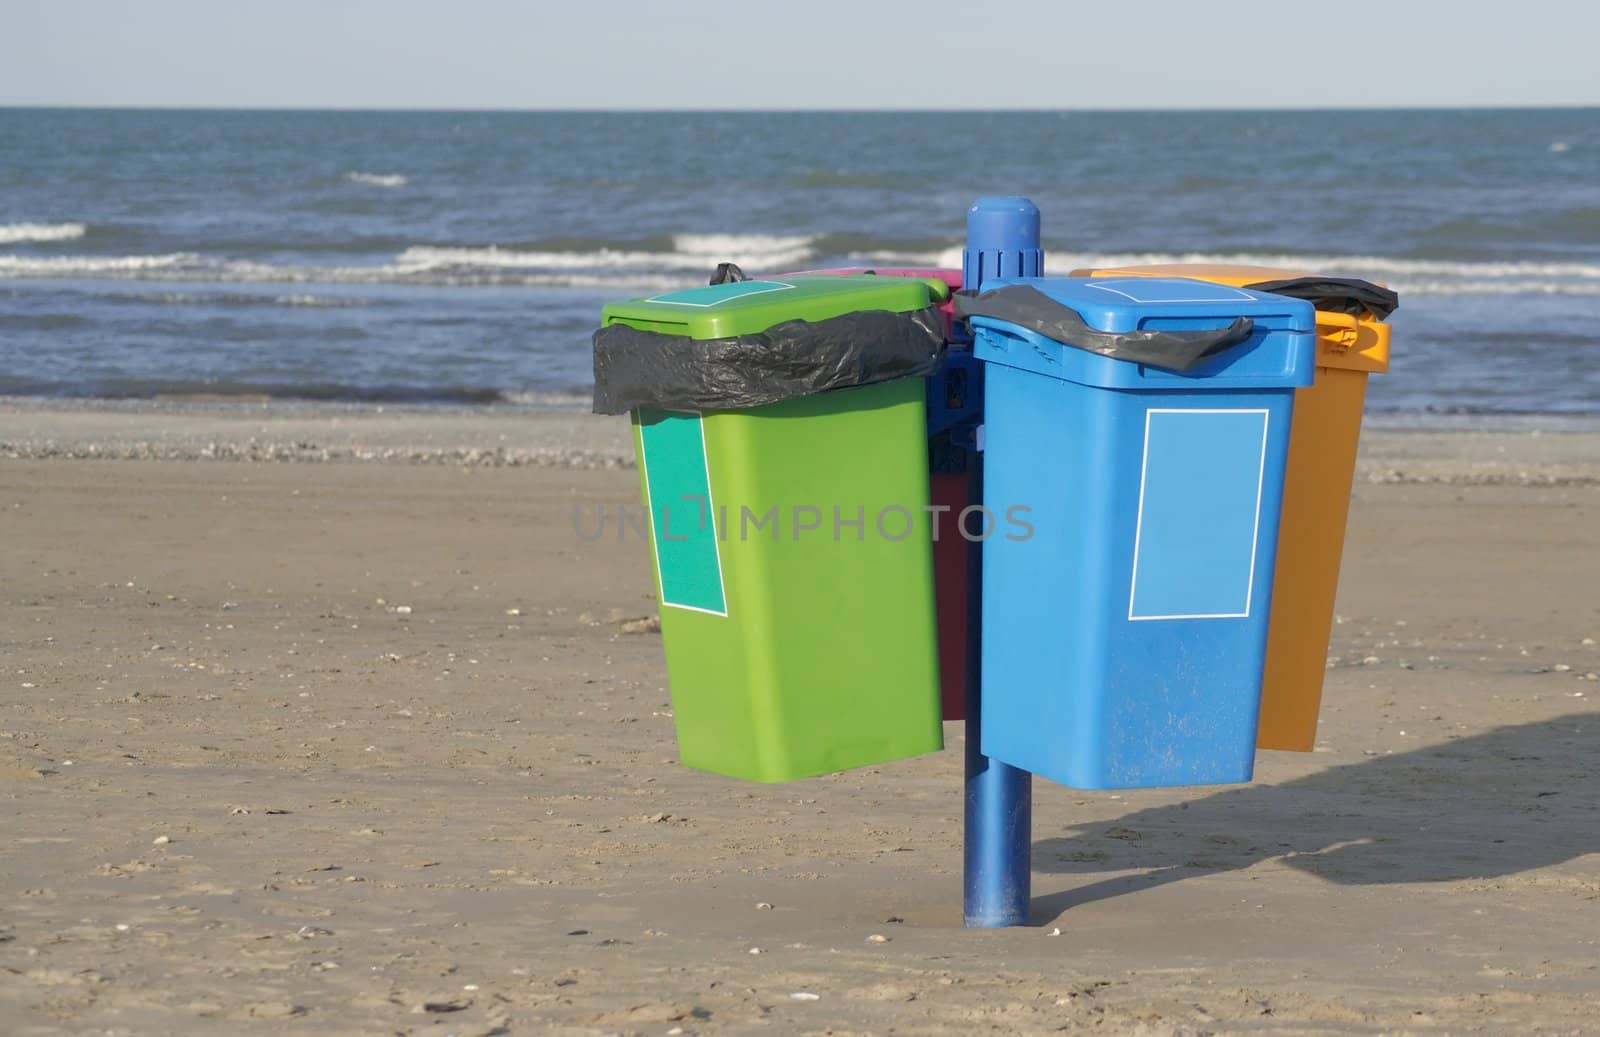 Garbage cans on the beach in Cervia in Italy